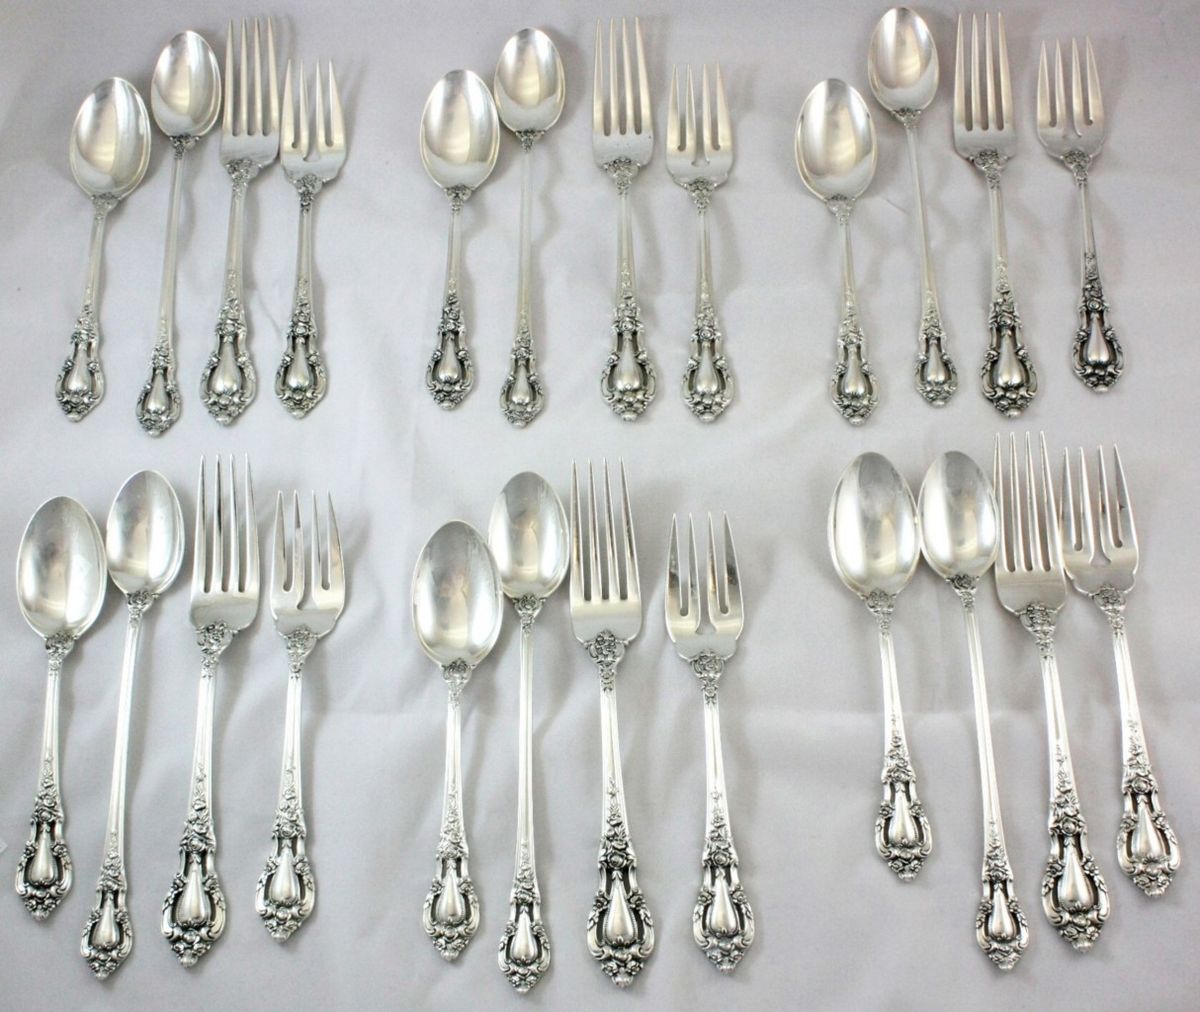 Lunt Eloquence Sterling Silver Flatware 4 Piece Set for 6 24 Pieces NO